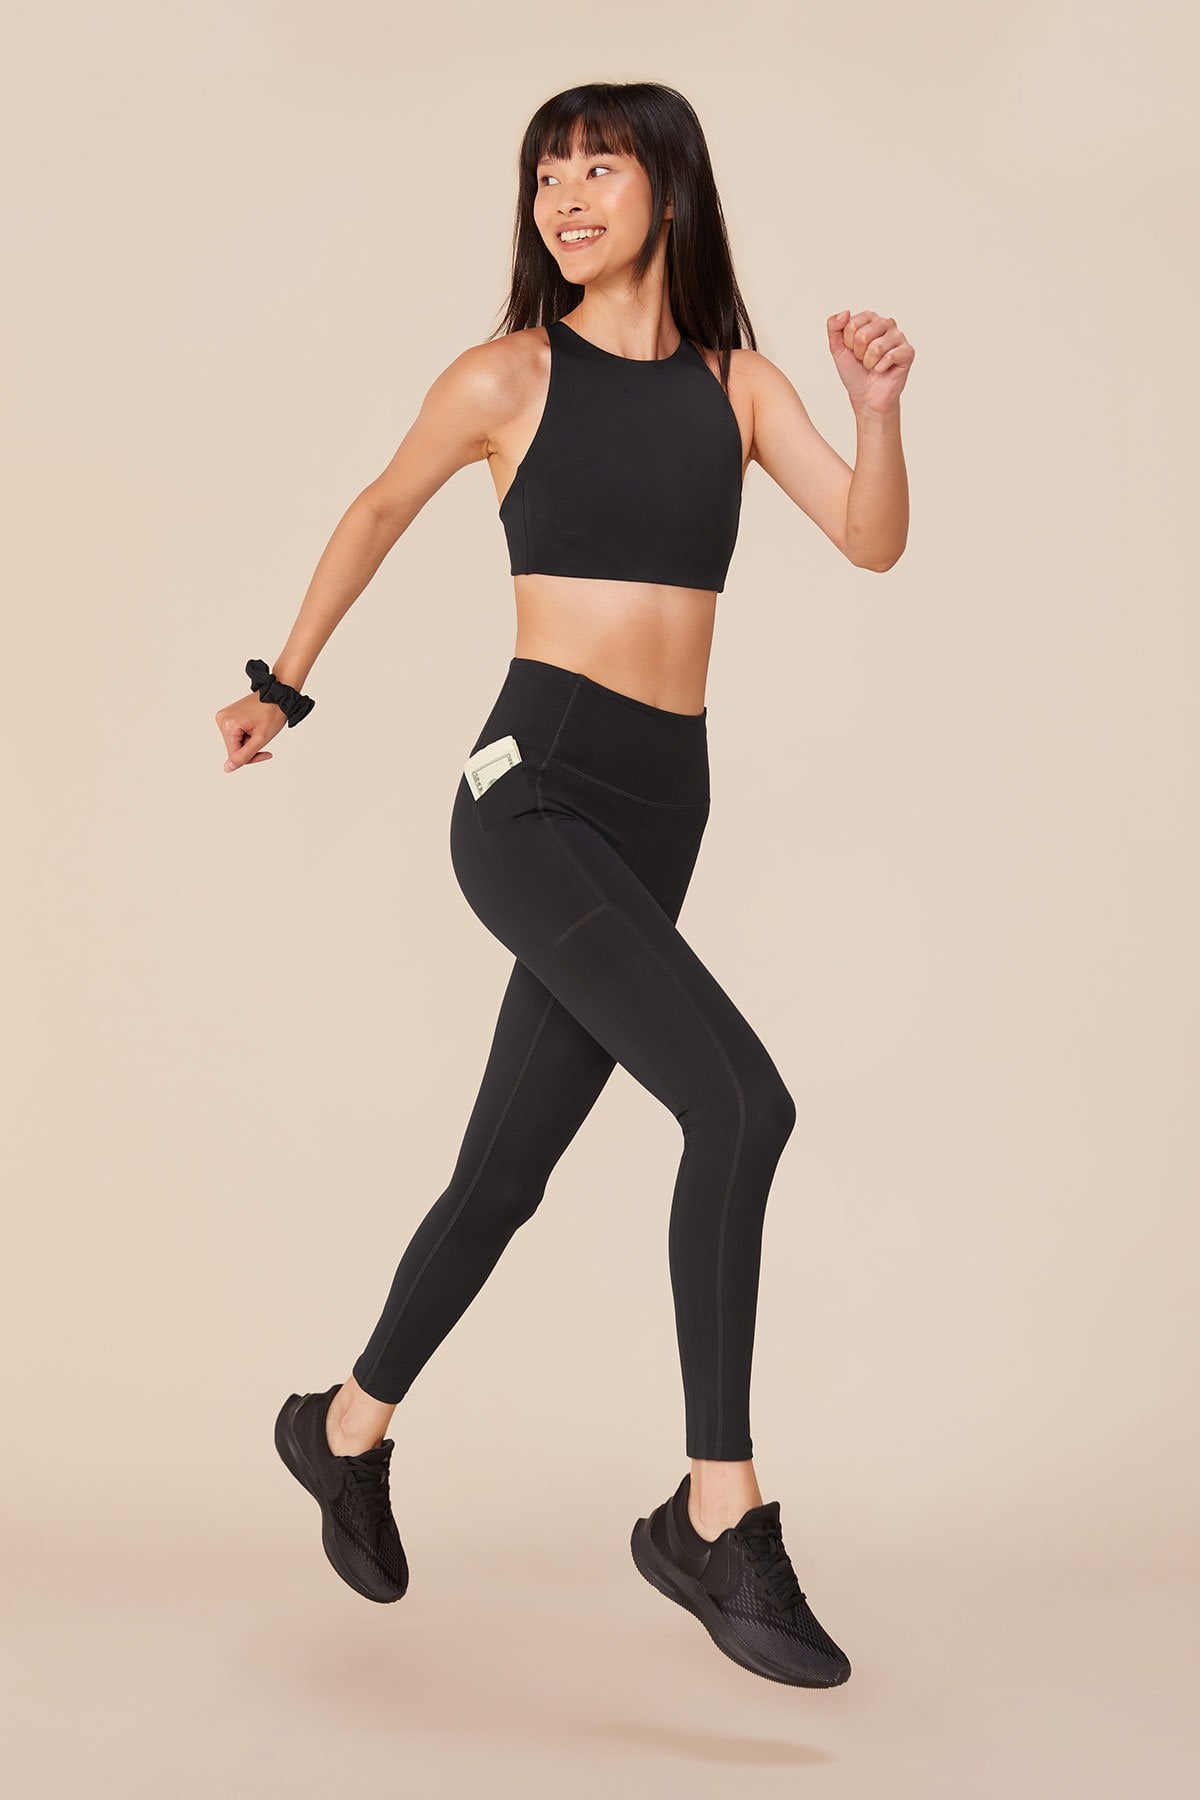 Girlfriend Collective FLOAT Sports Bra and Leggings Review